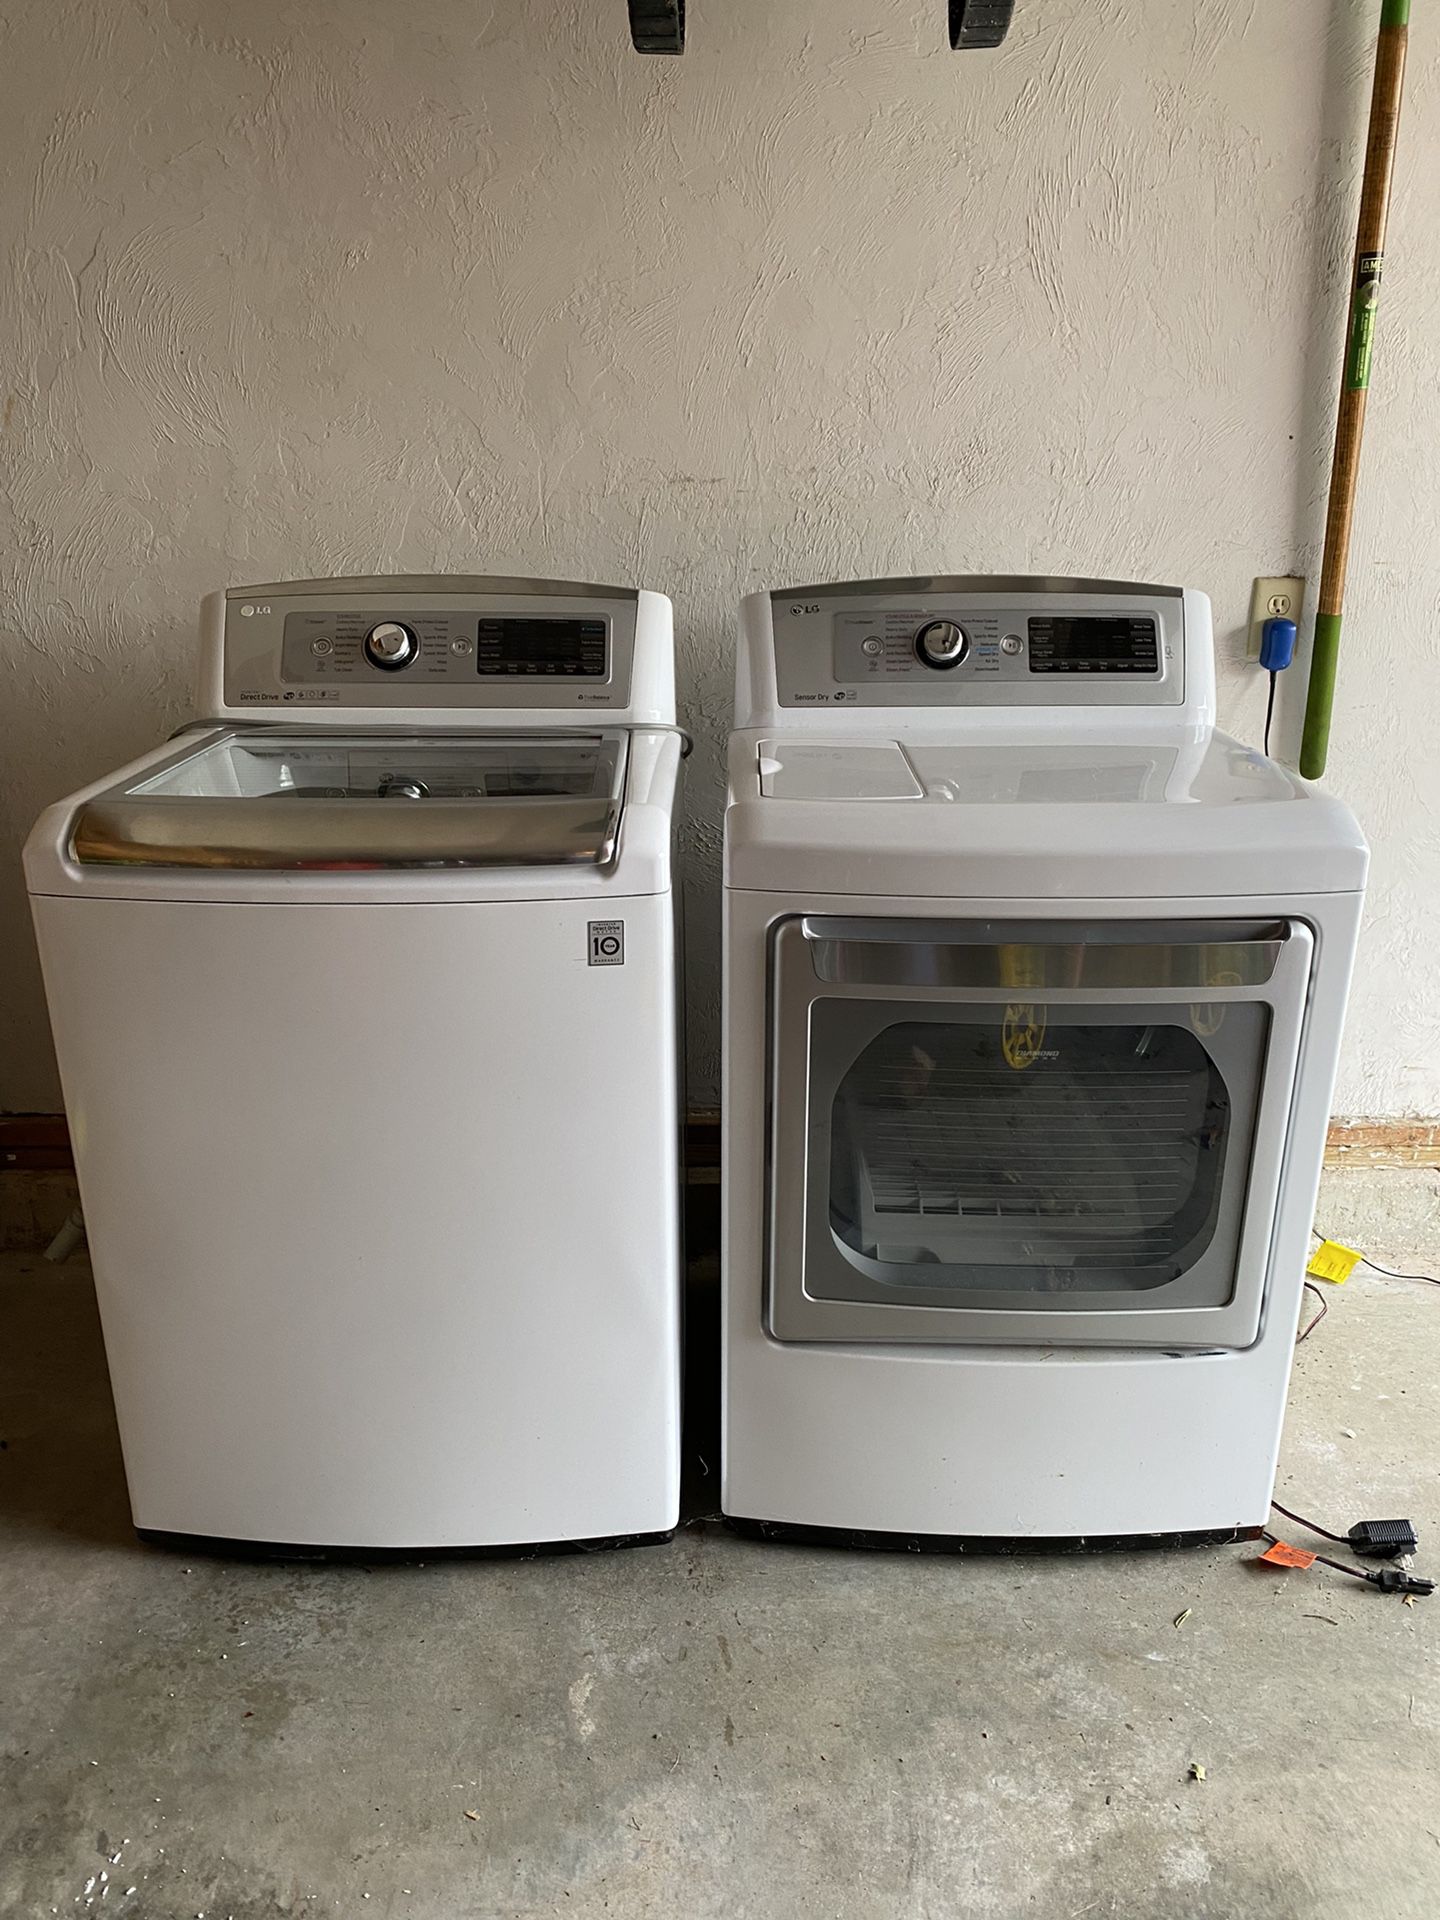 LG he Washer & Dryer